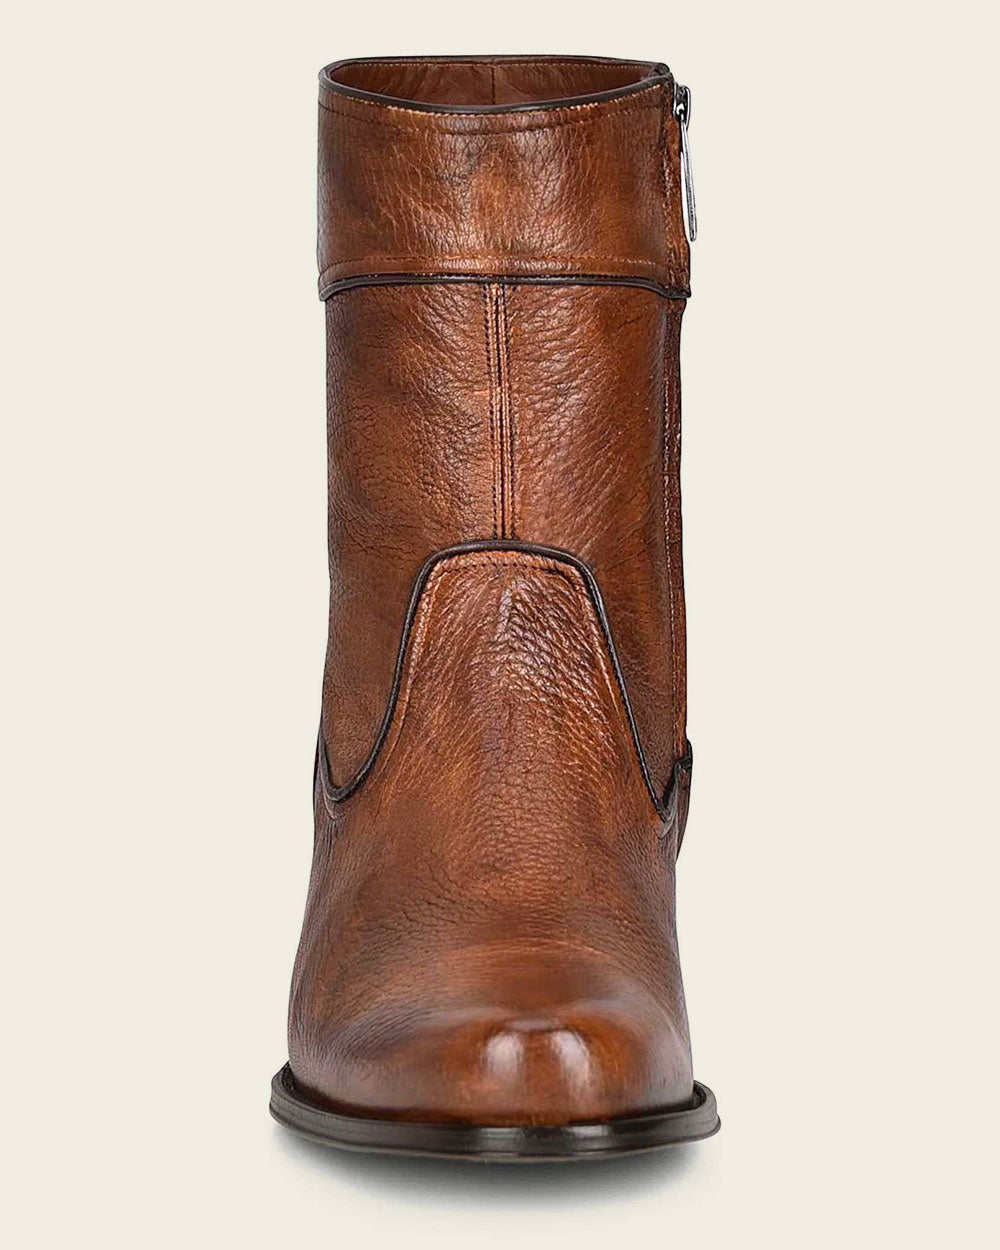 Our deer leather boots feature a natural, unique texture that's soft to the touch, adding a tactile dimension to the luxury experience.